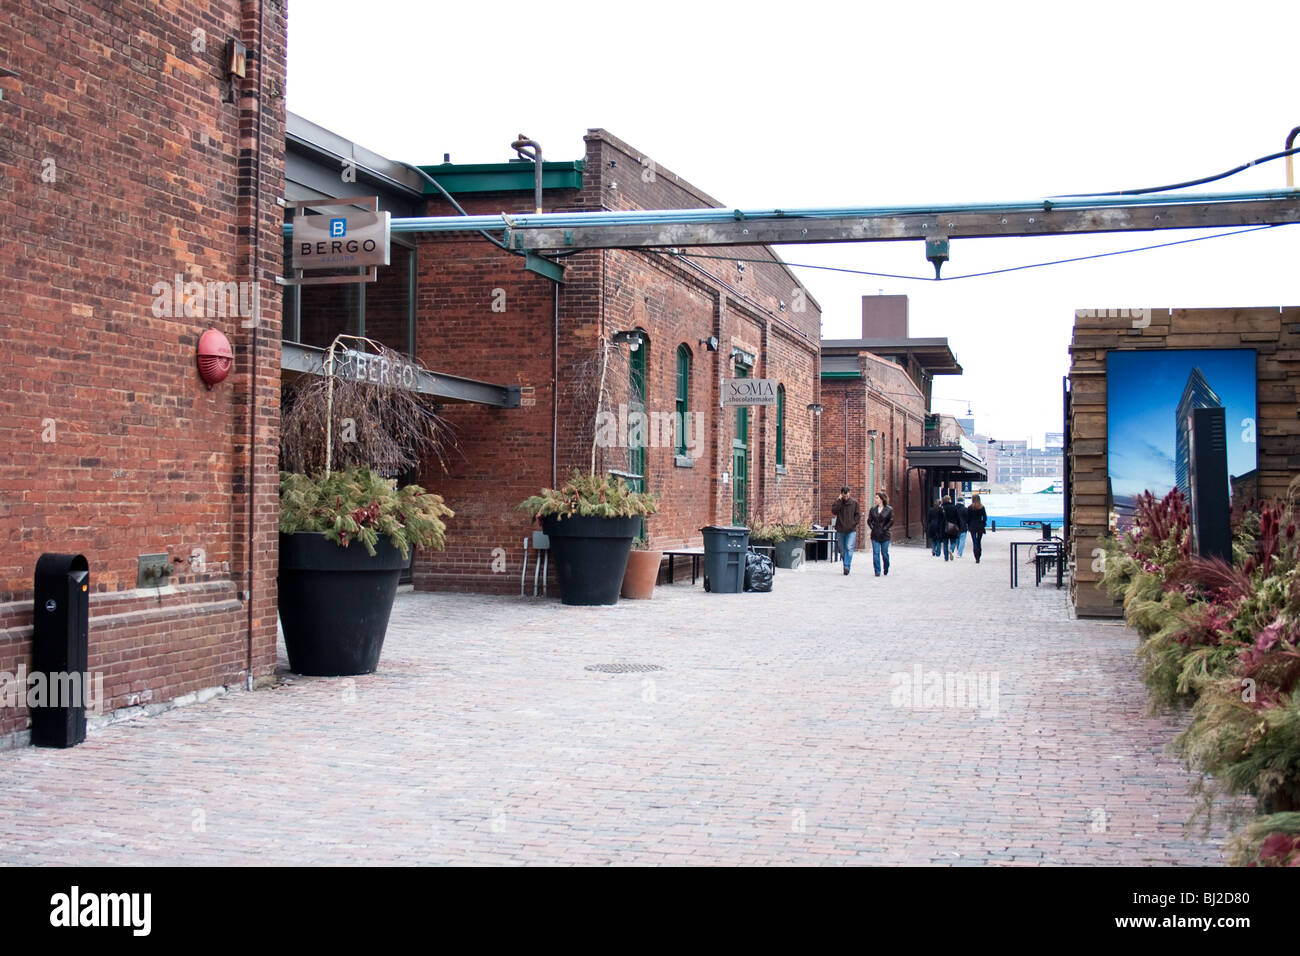 Tourists walking on the cobblestone street at the distillery district Stock Photo